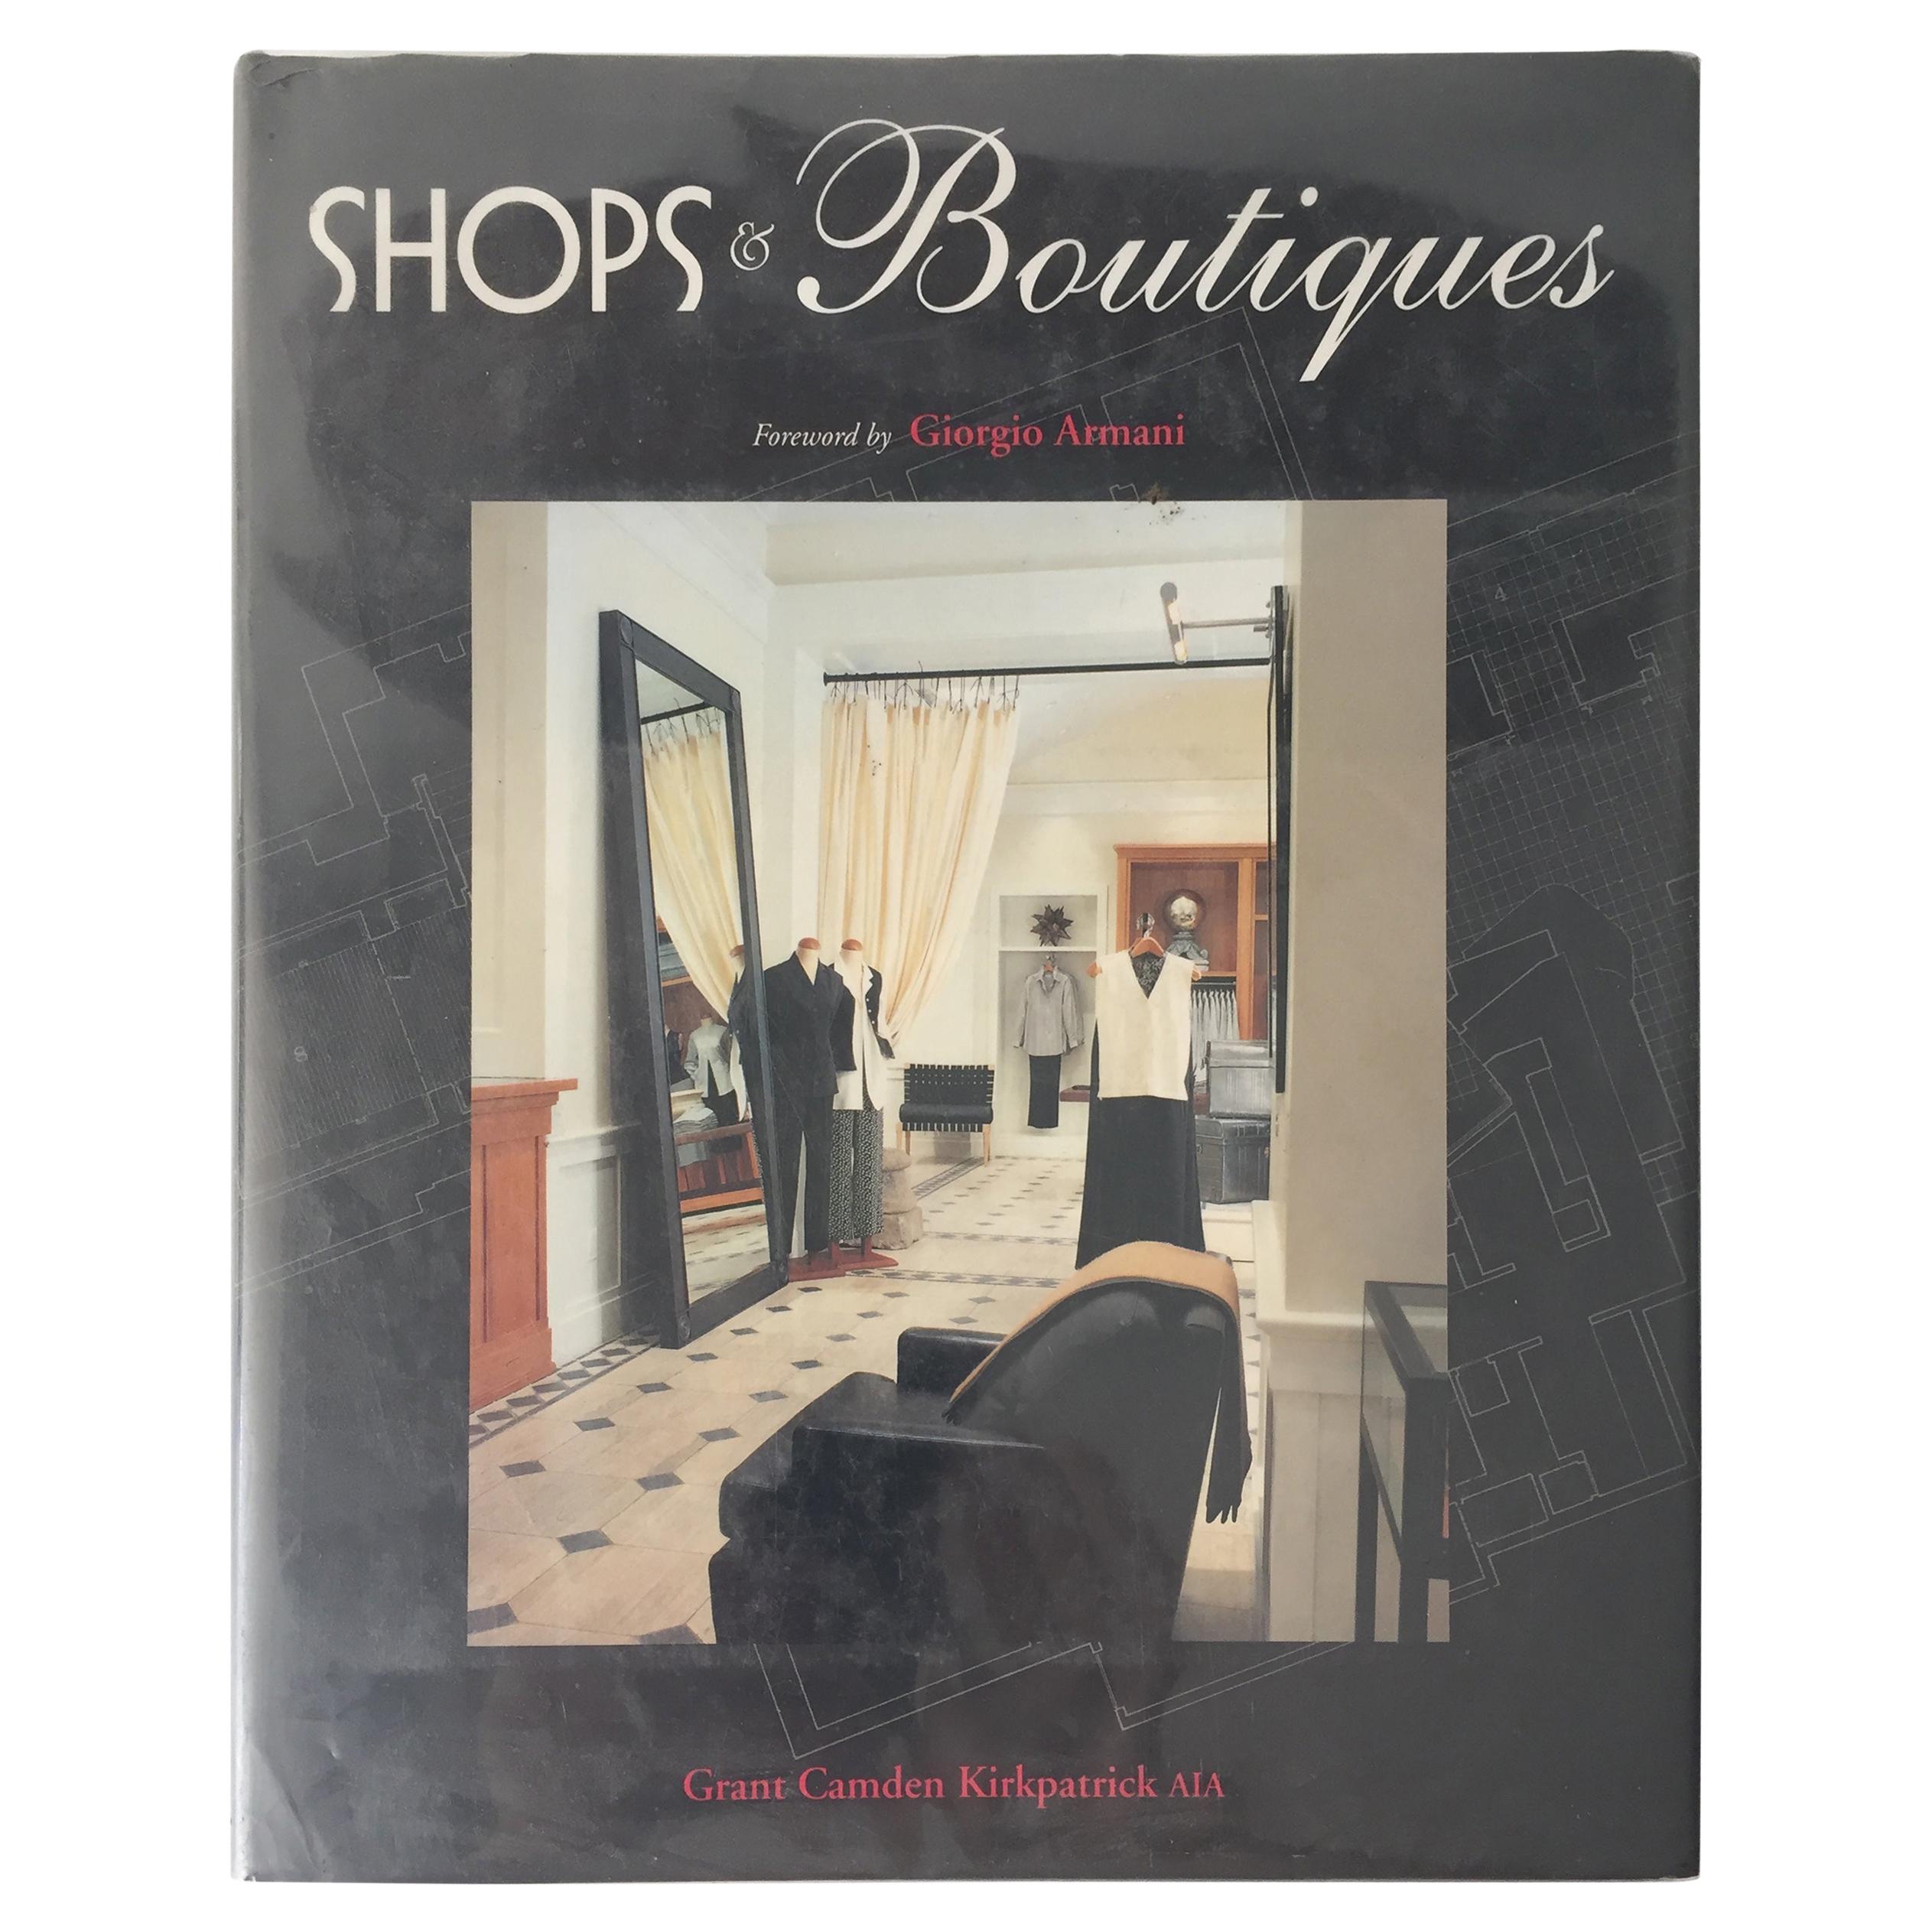 Shops & Boutiques, Foreword by Giorgio Armani by Grant Camden Kirkkpatric AIA